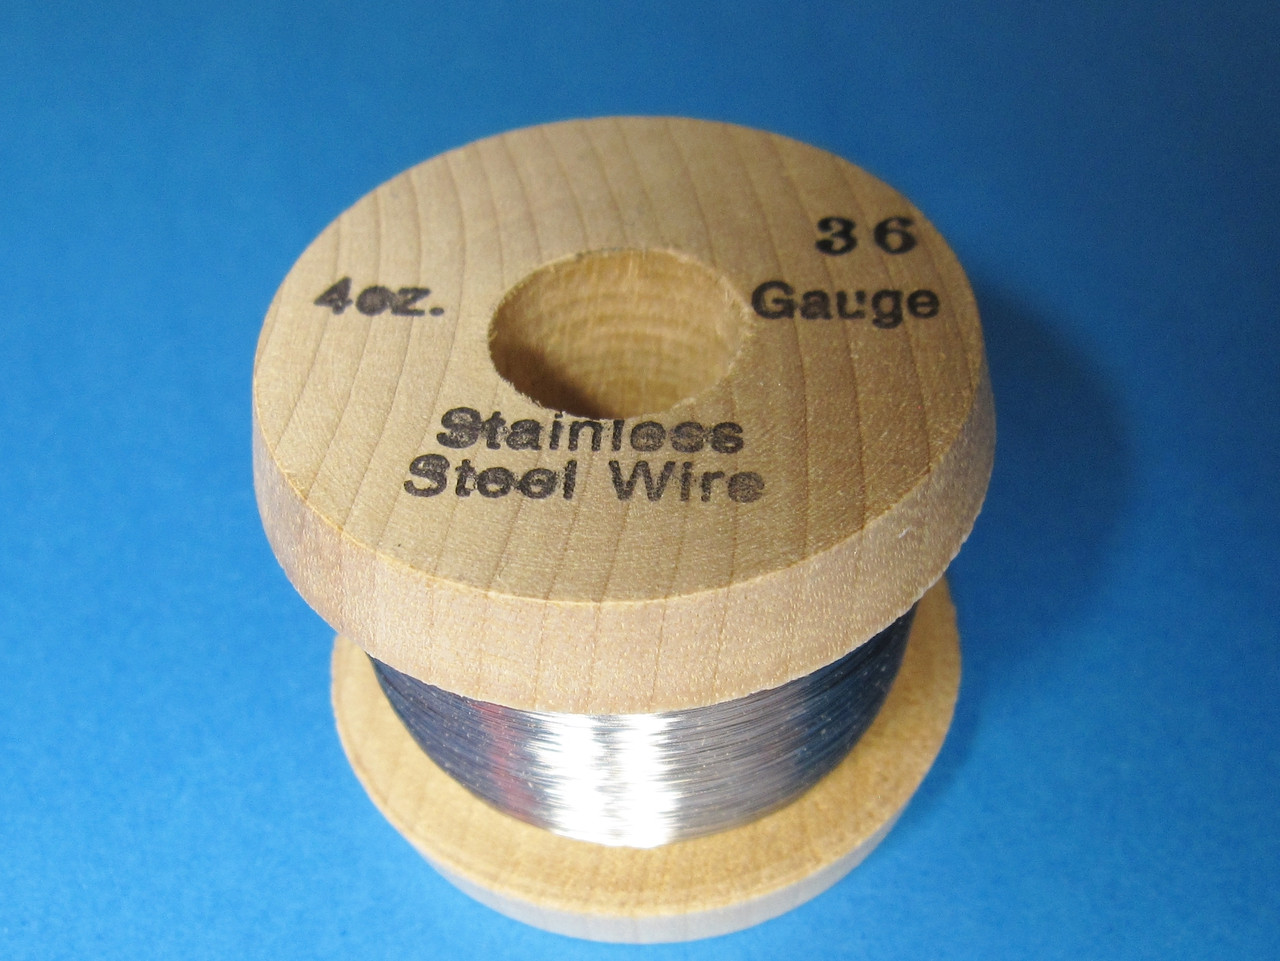 28 Gauge Stainless Steel Surgical Wire (4-28)